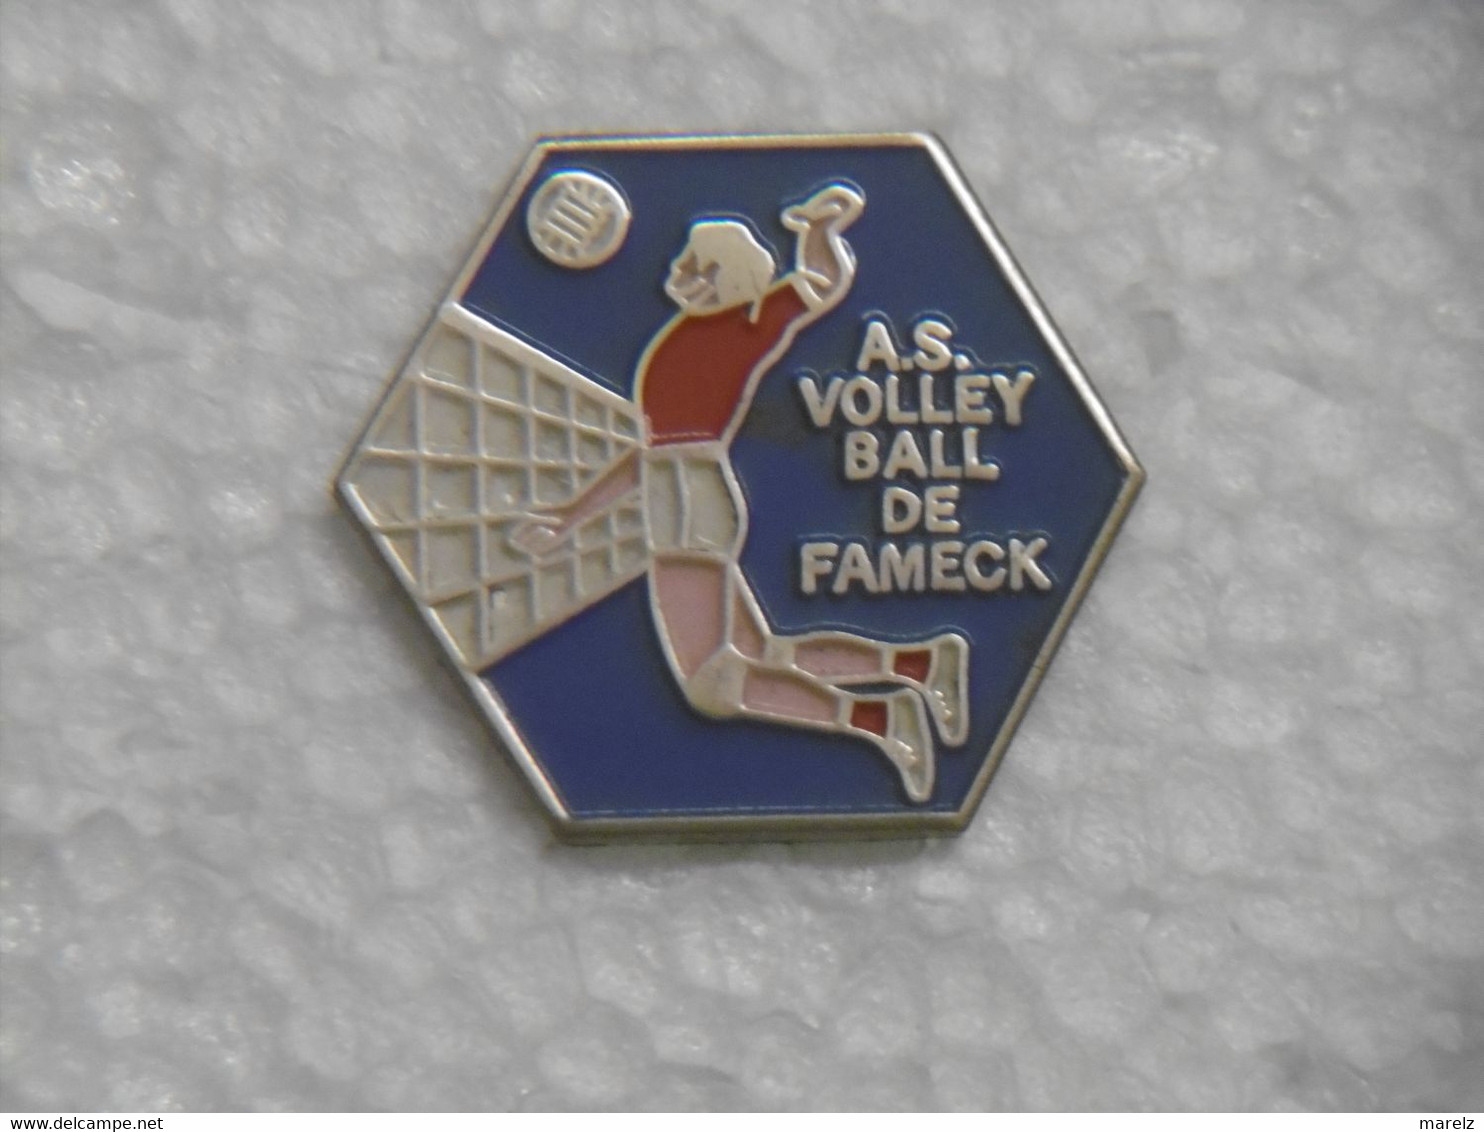 Pin's Sports - A.S. VOLLEYBALL De FAMECK - Pin Badge Volley Ball 57 MOSELLE - Volleyball